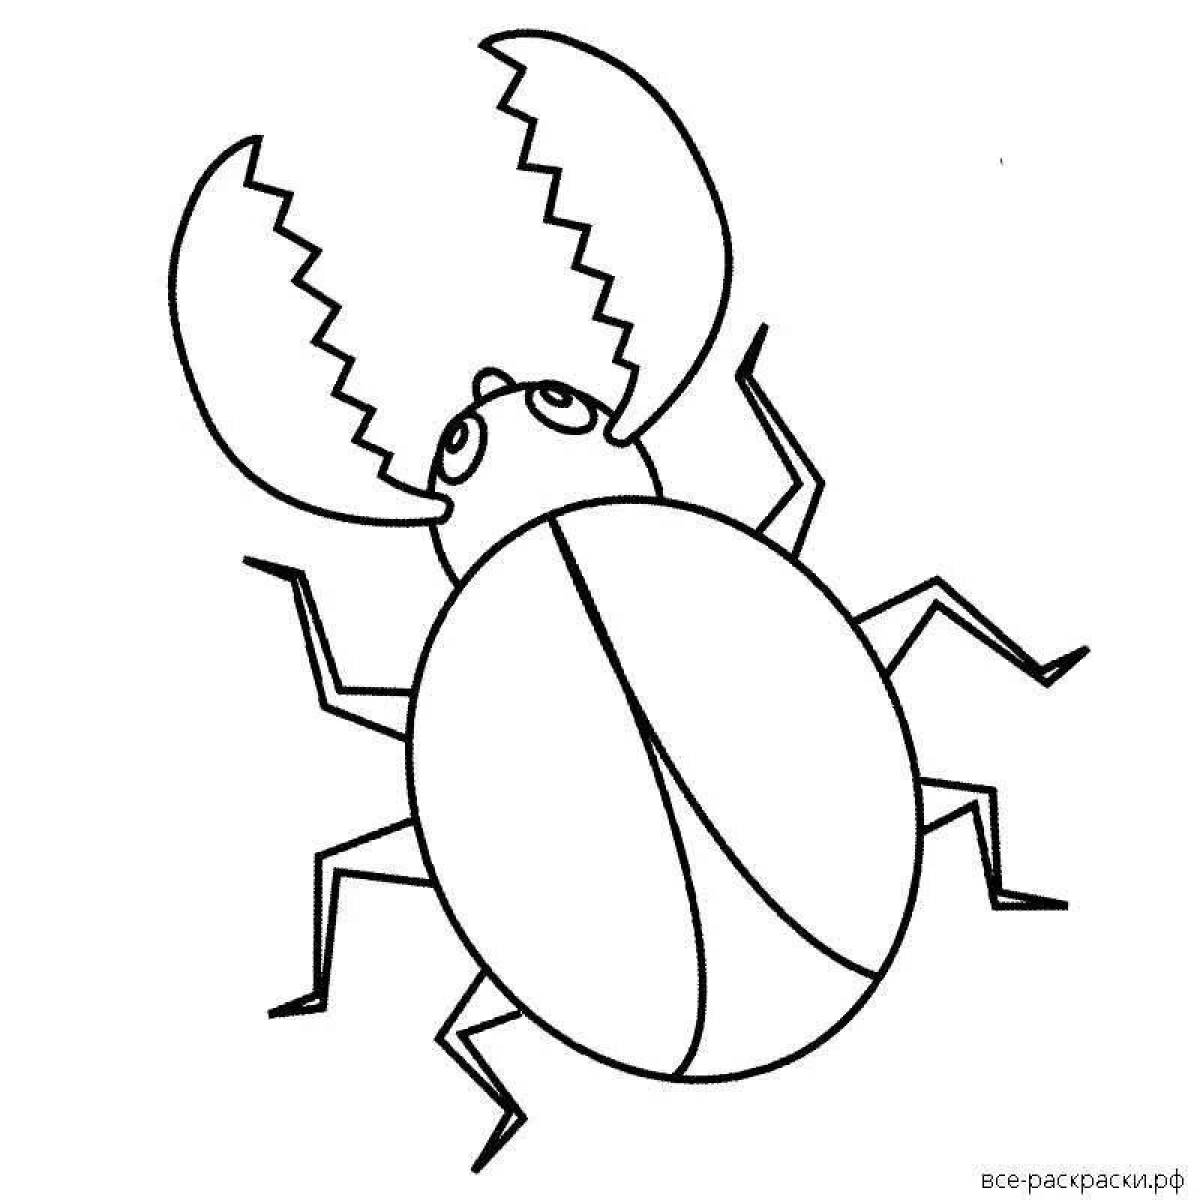 Great beetle coloring book for kids